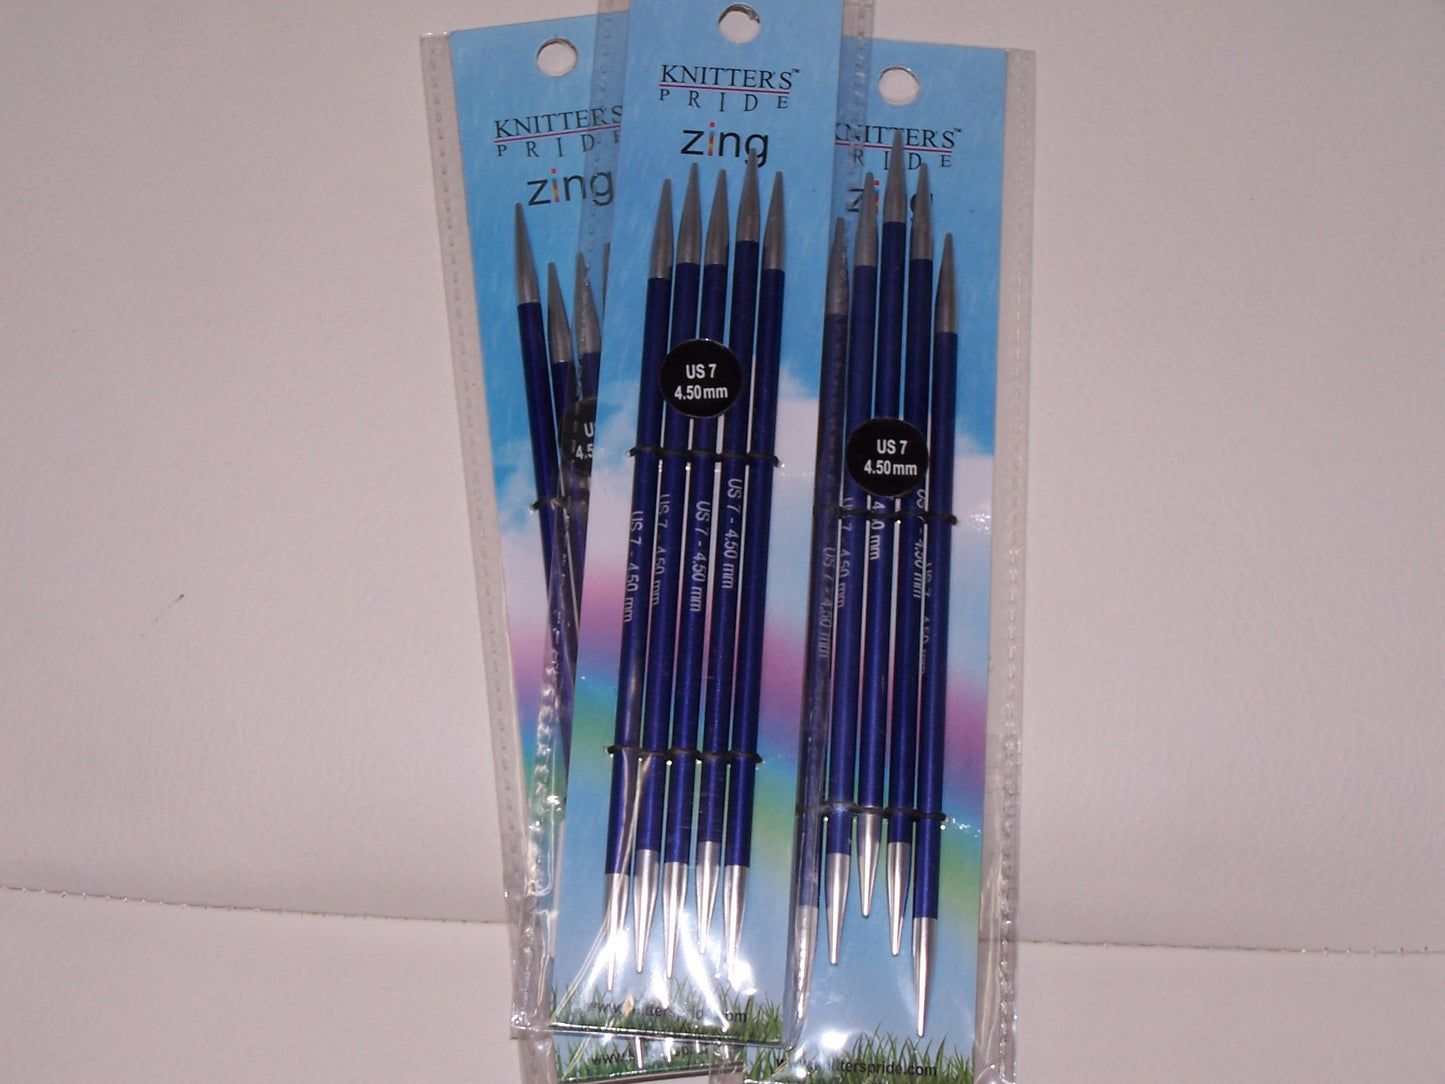 Knitters Pride Zing US 7 (4.50mm) size 6 inch DPN's